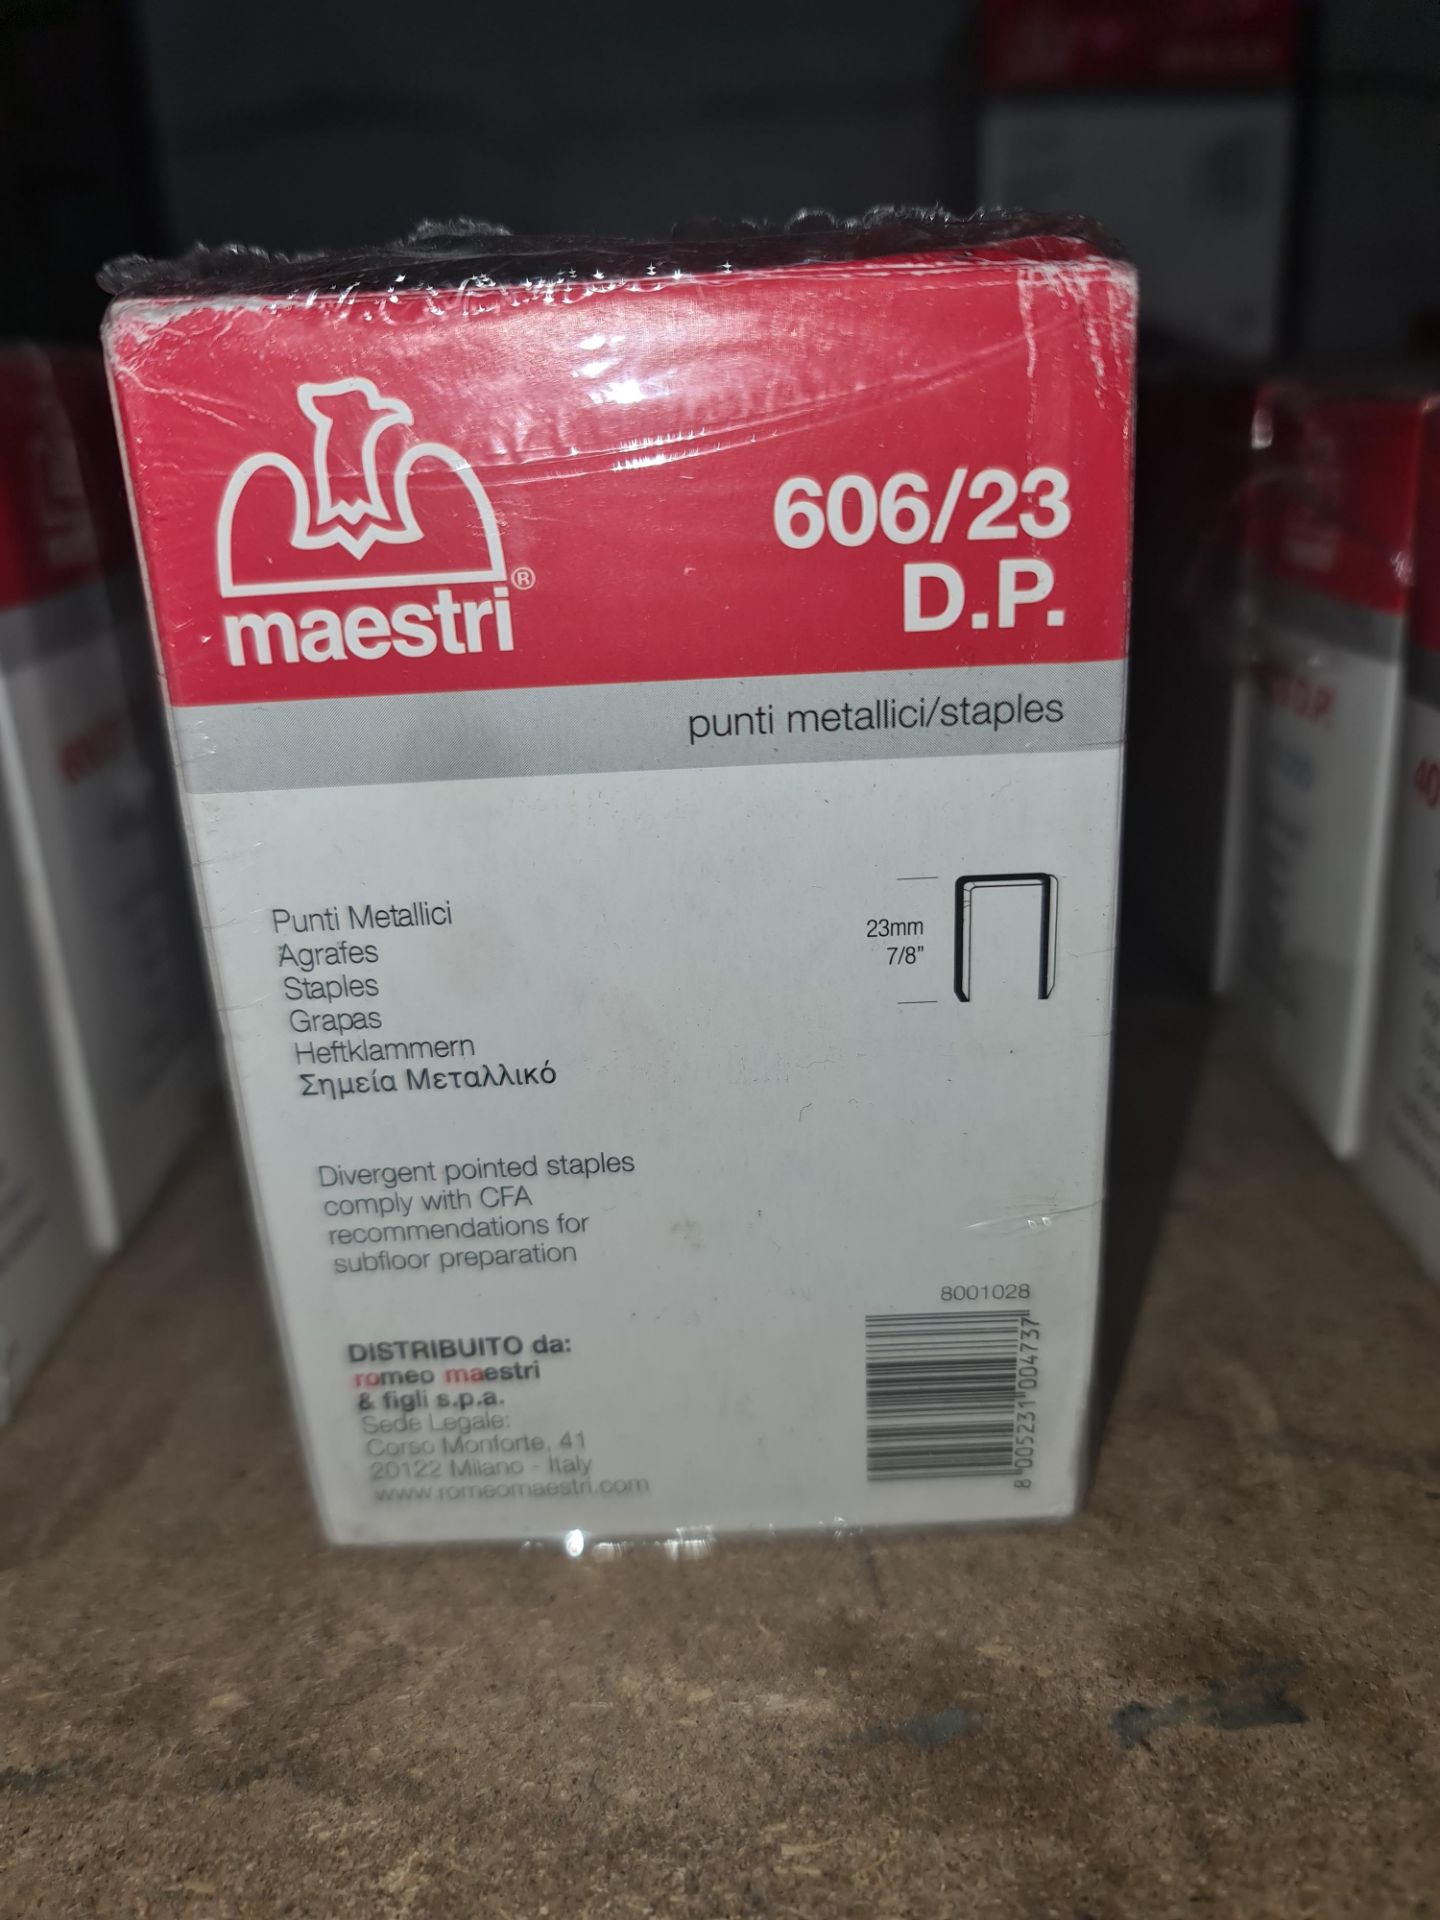 8 boxes of Maestri 606/23 DP staples, each box containing 4,800 staplesLots 31 - 328 comprise the - Image 2 of 2